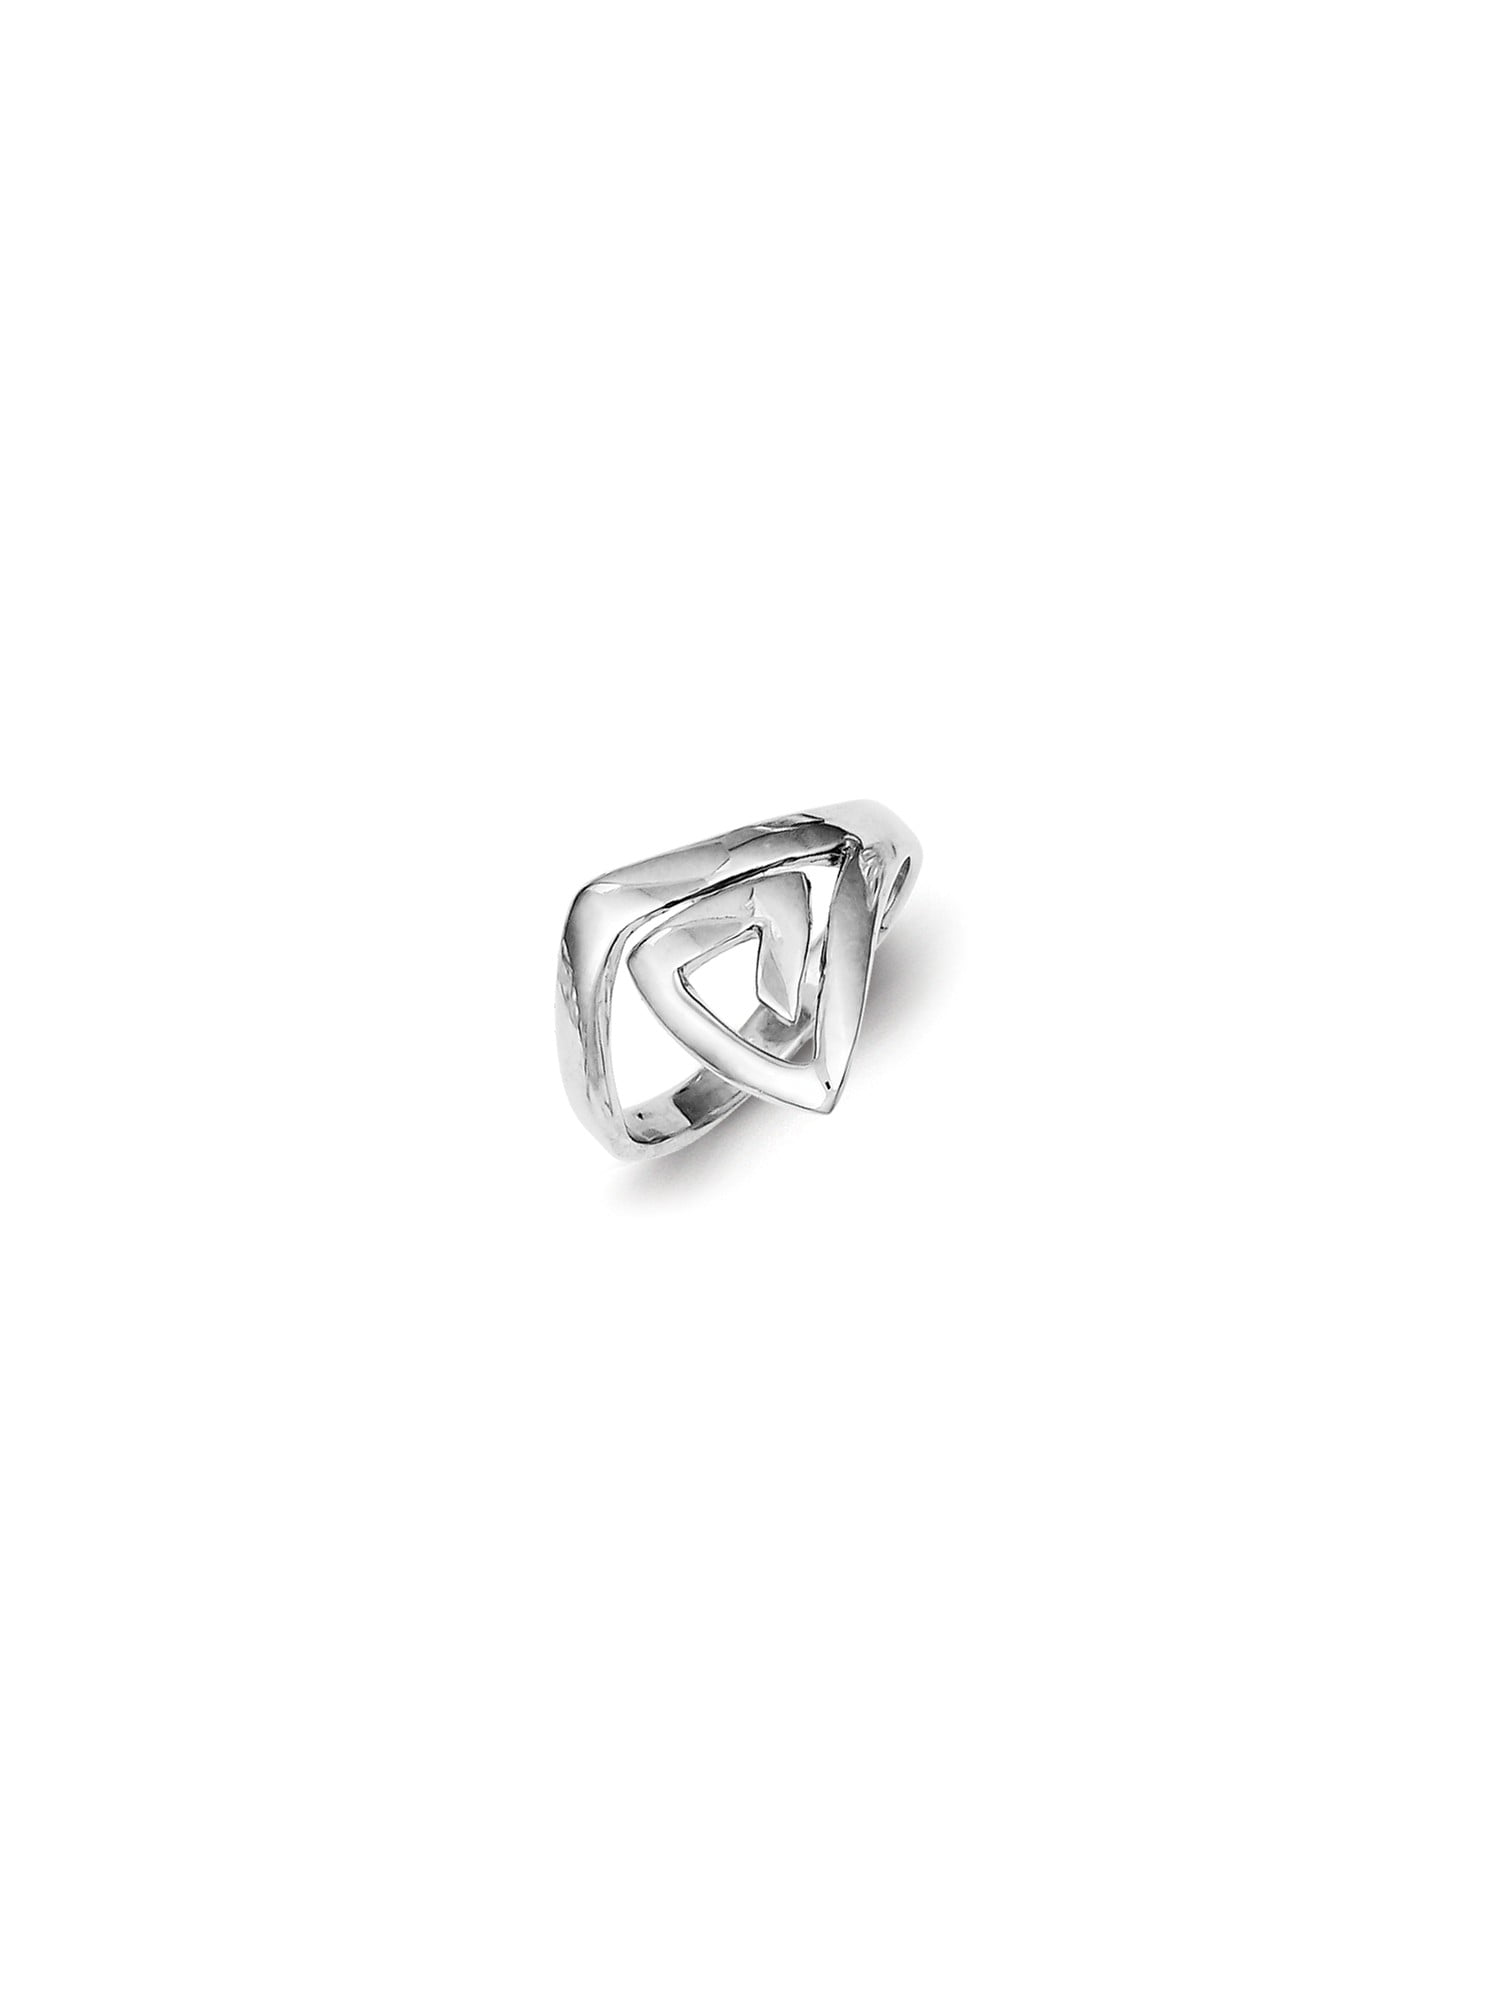 Solid 925 Sterling Silver Triangle Ring All sizes